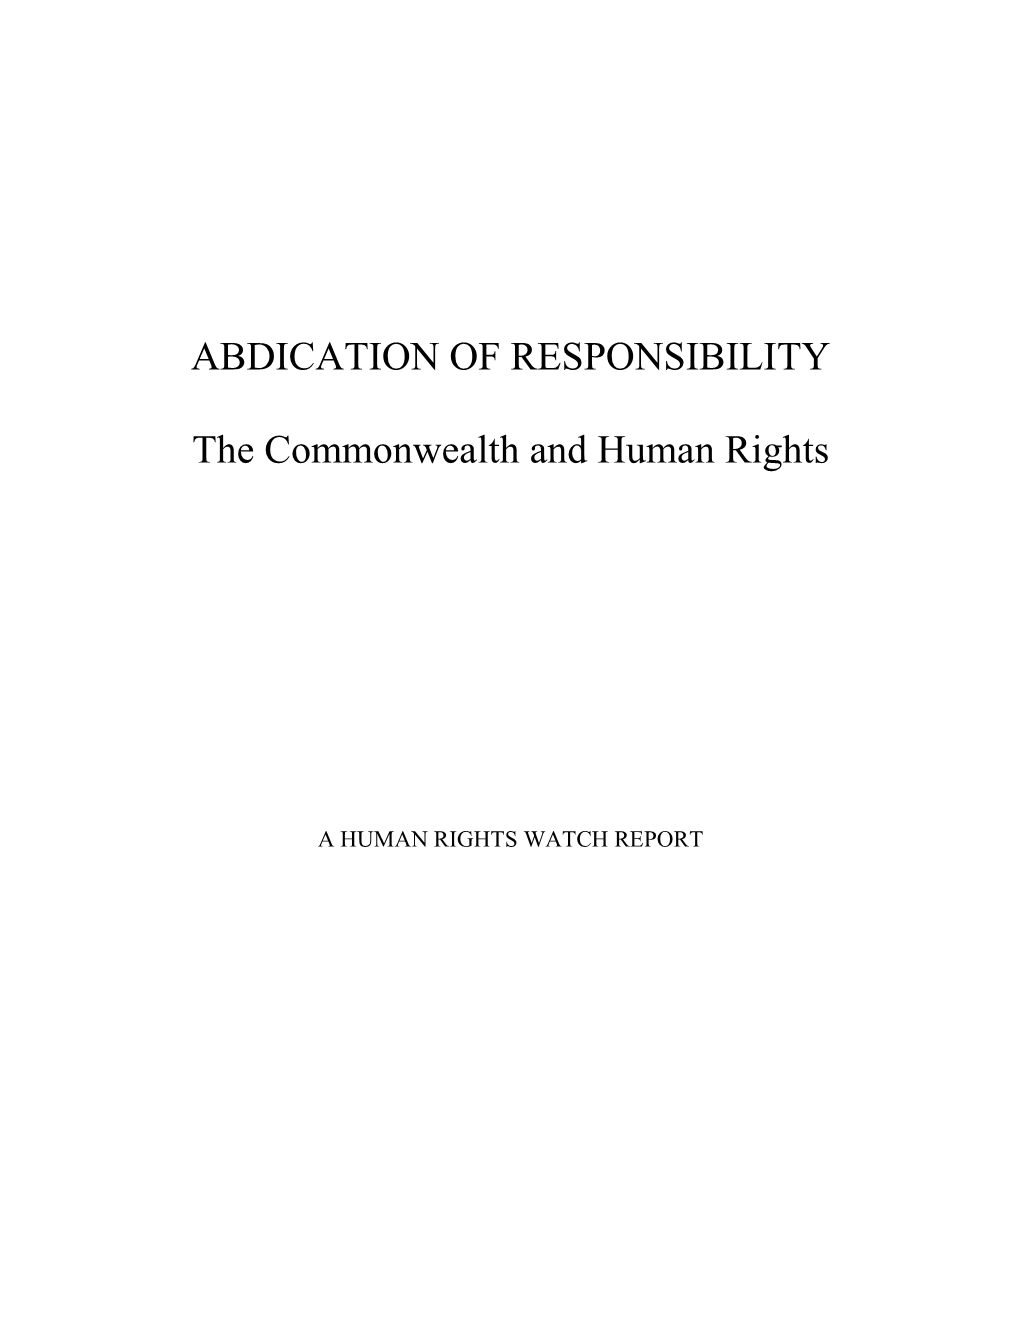 ABDICATION of RESPONSIBILITY the Commonwealth and Human